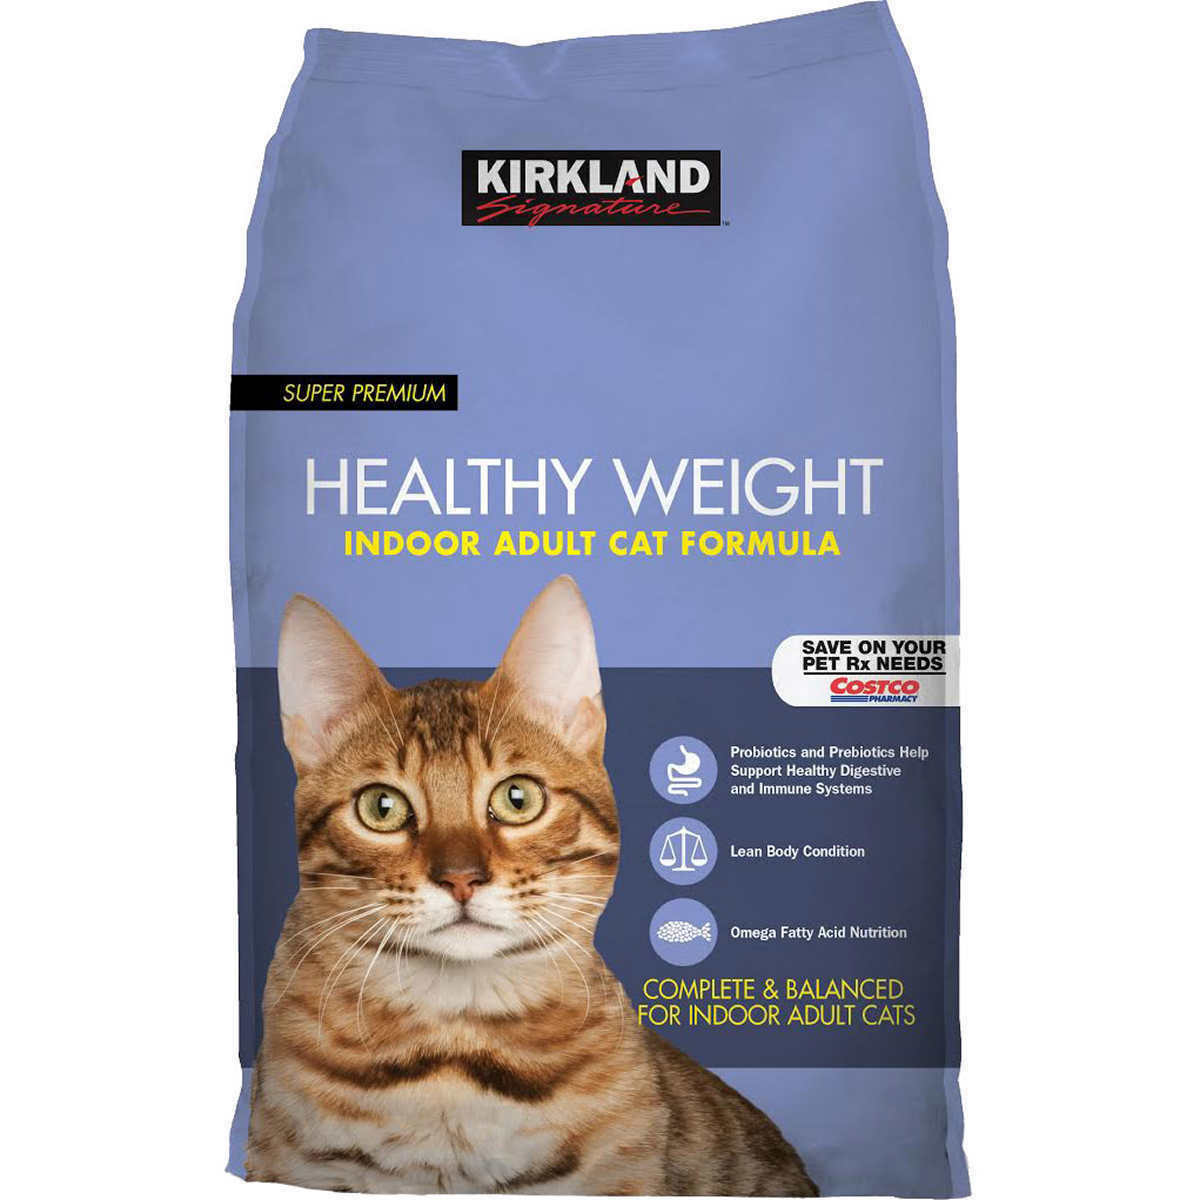 NEW Kirkland Signature Healthy Weight Cat Food 20 lbs. **FREE SHIPPING**